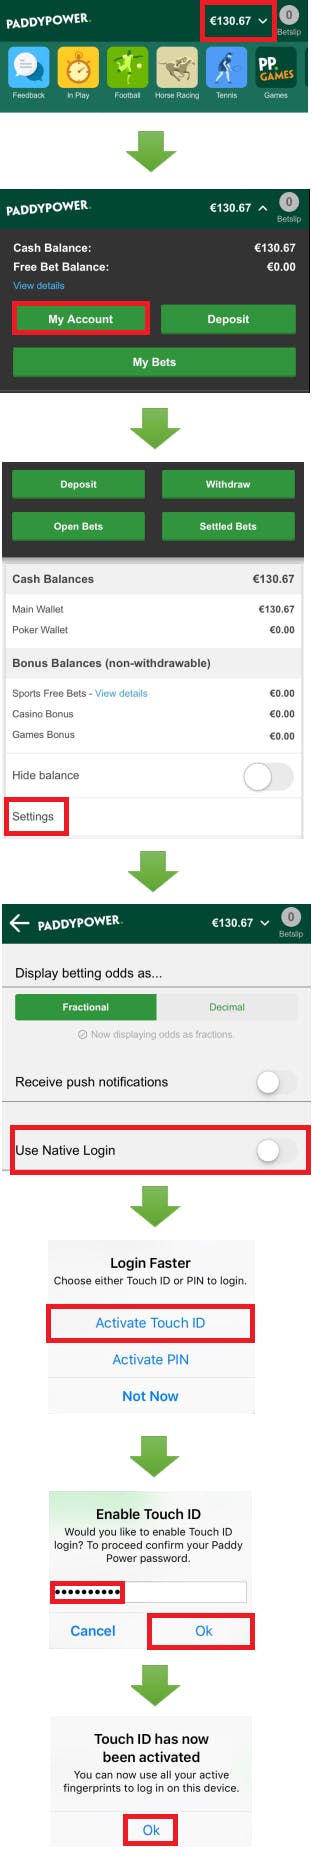 Photo: log in paddy power